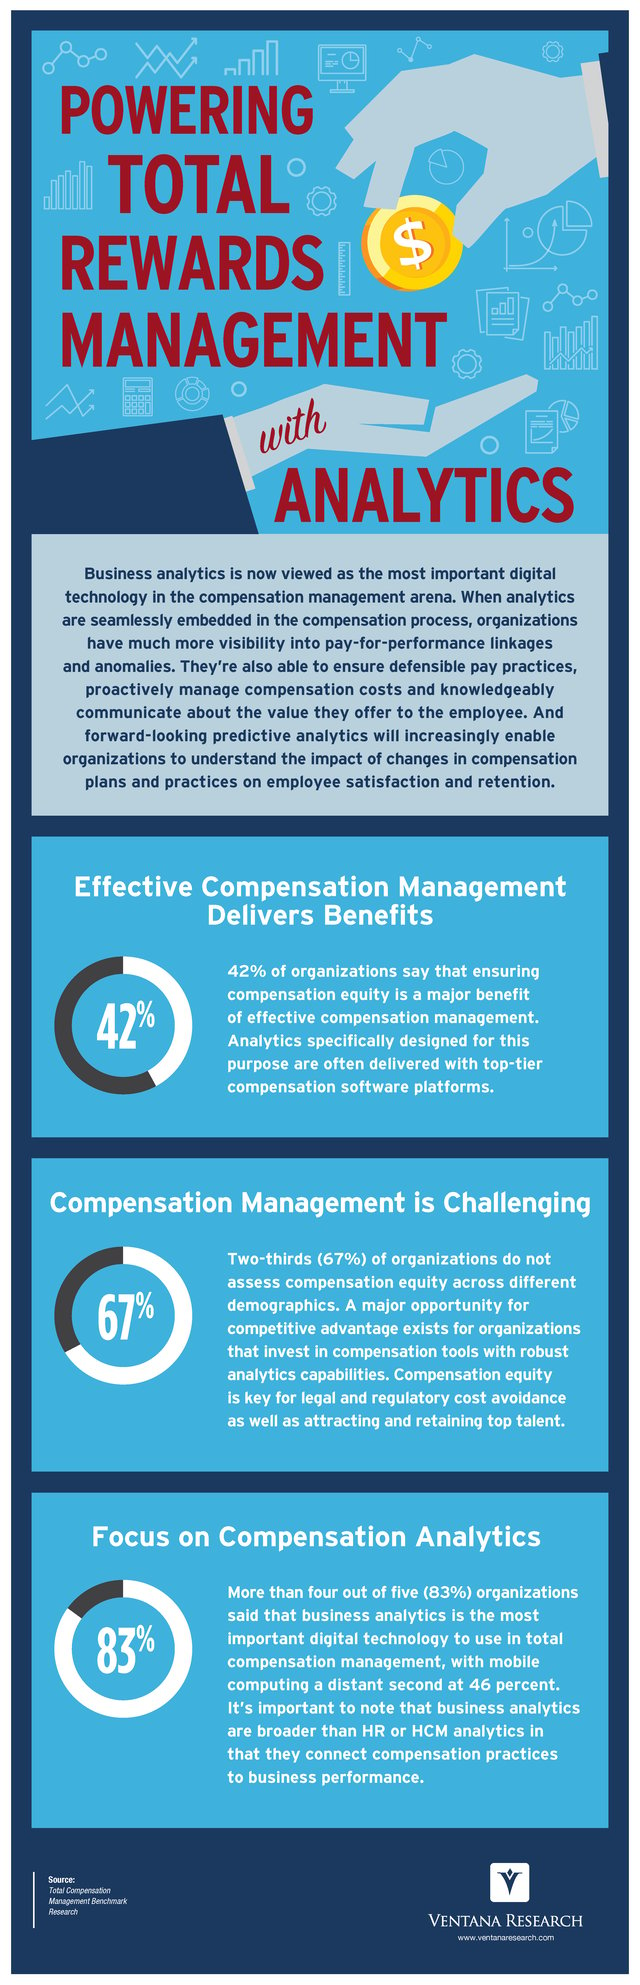 PeopleFluent_Compensation_Analytics_Infographic_(1710-0533-01INFO)_Lres_2020_Unsponsored.png